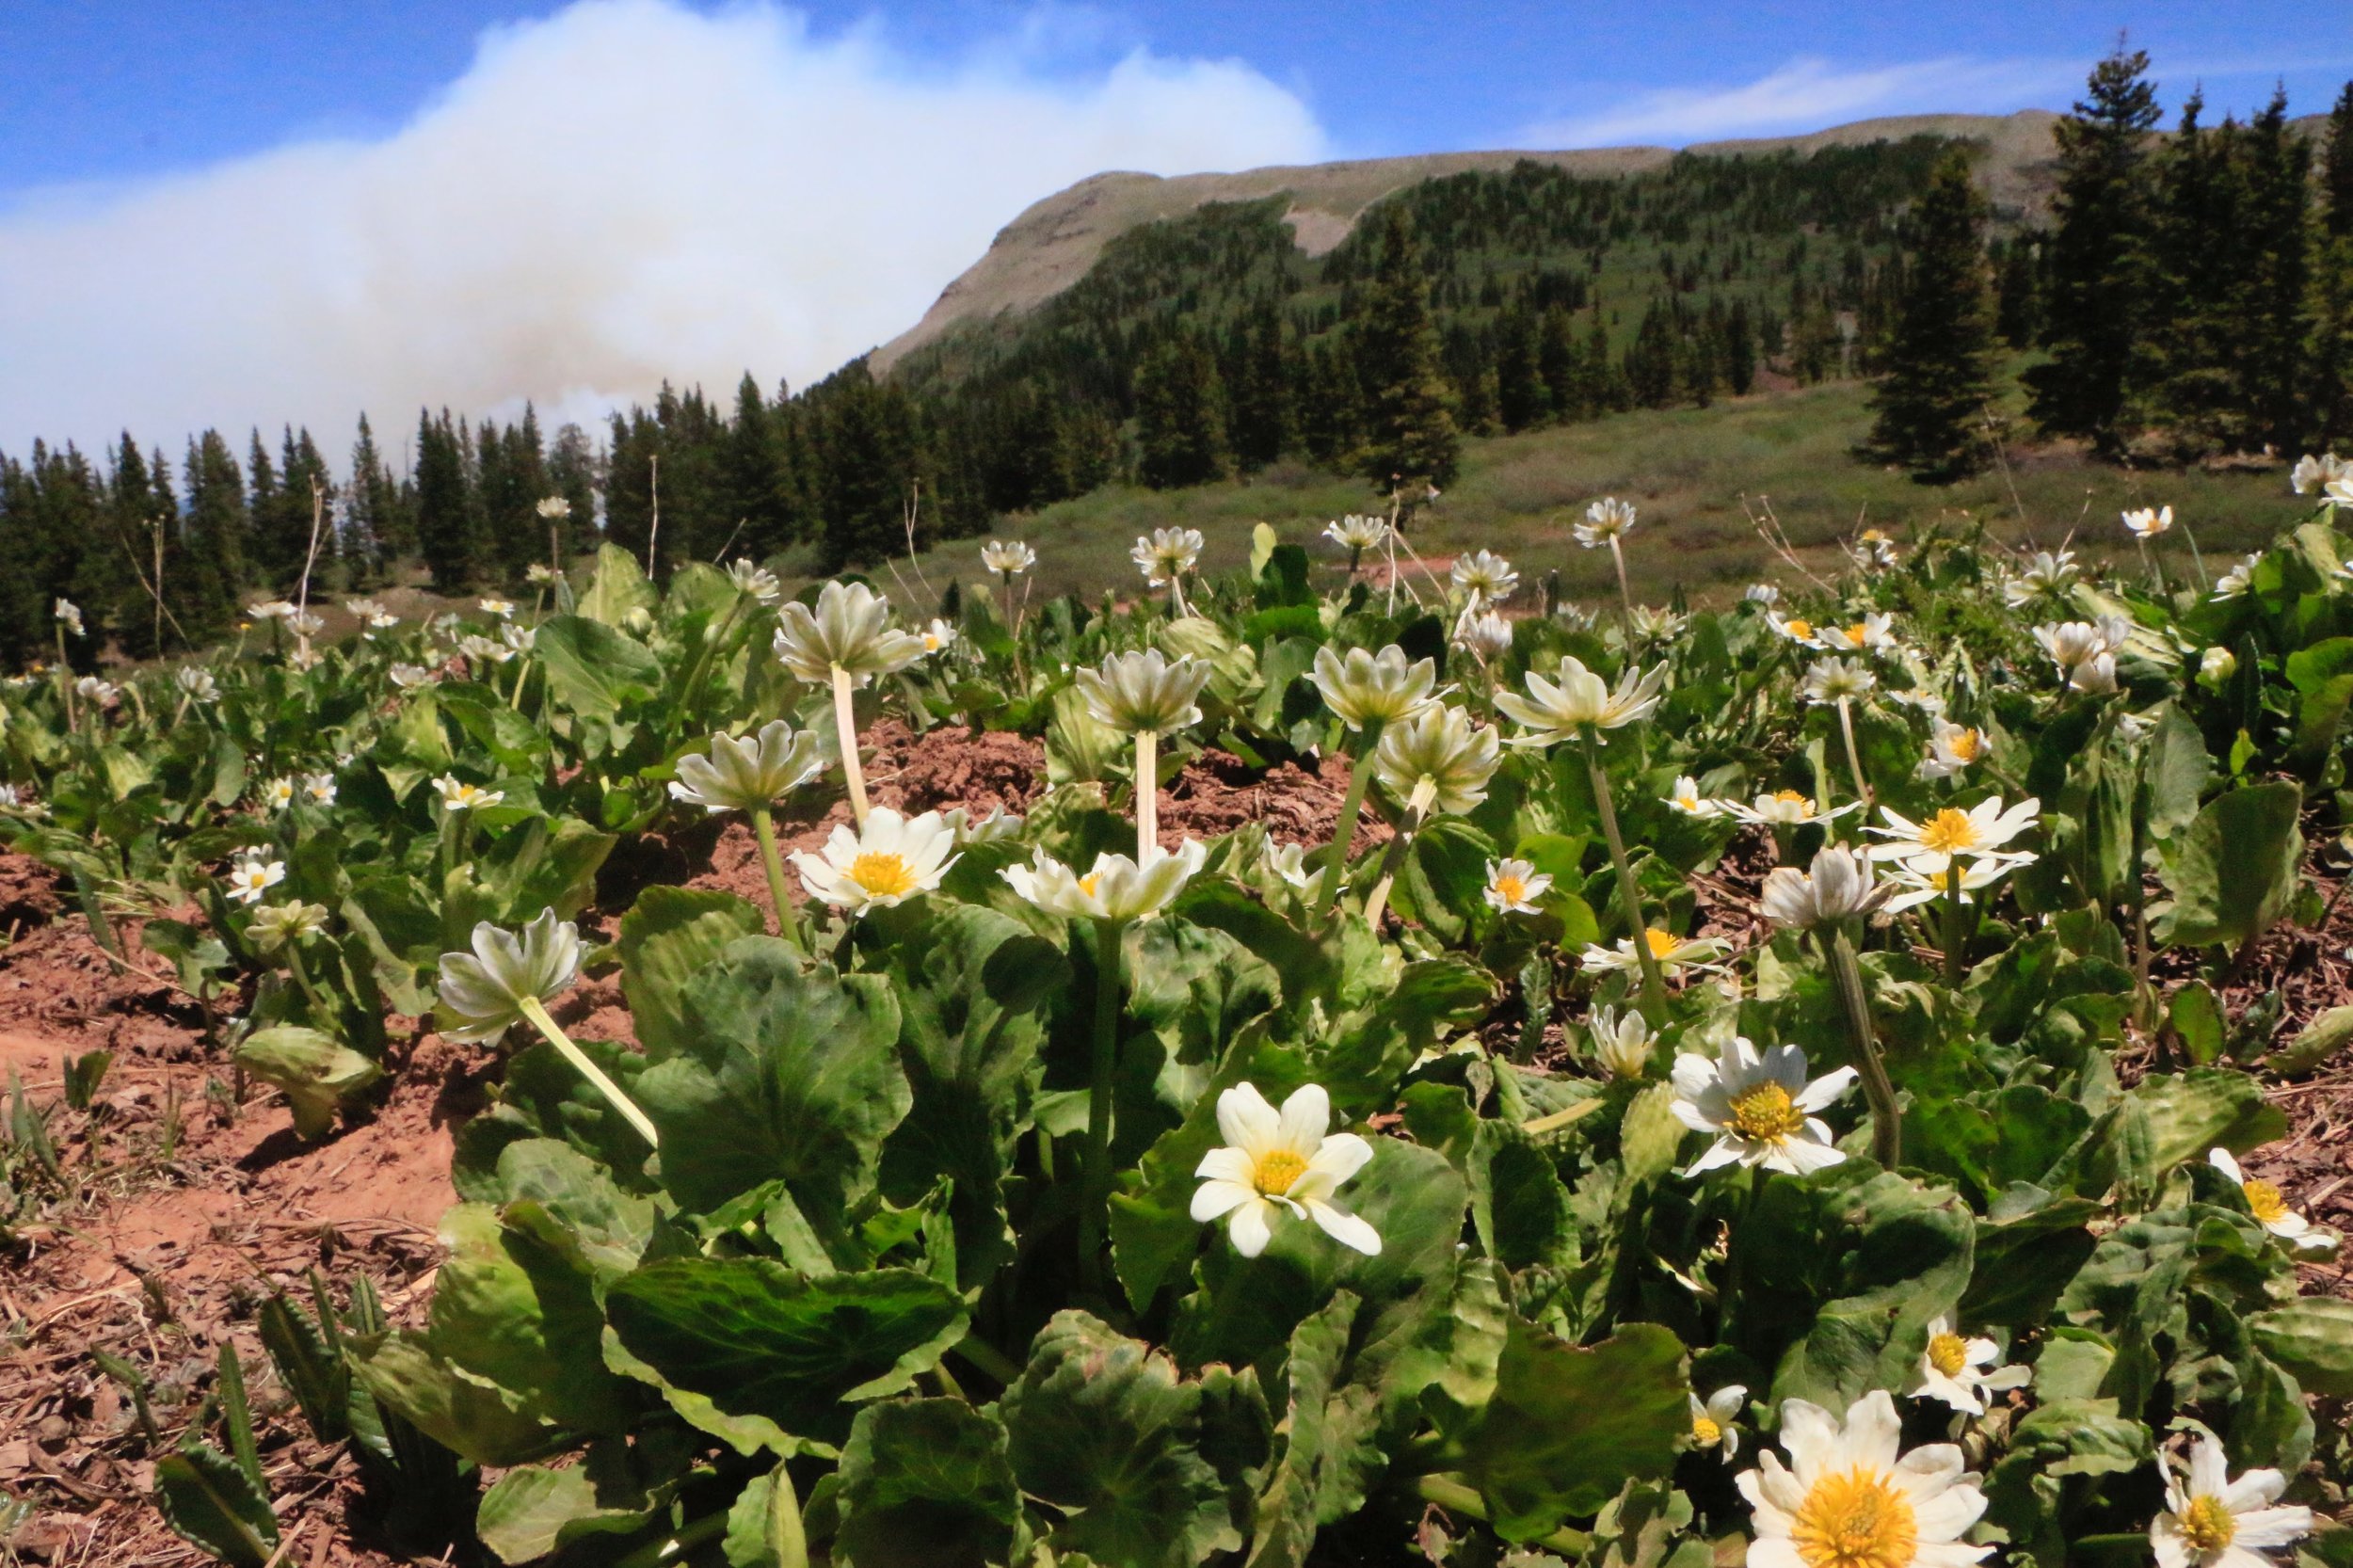 416 Fire with marsh marigolds in the foreground, photo by Priscilla Sherman